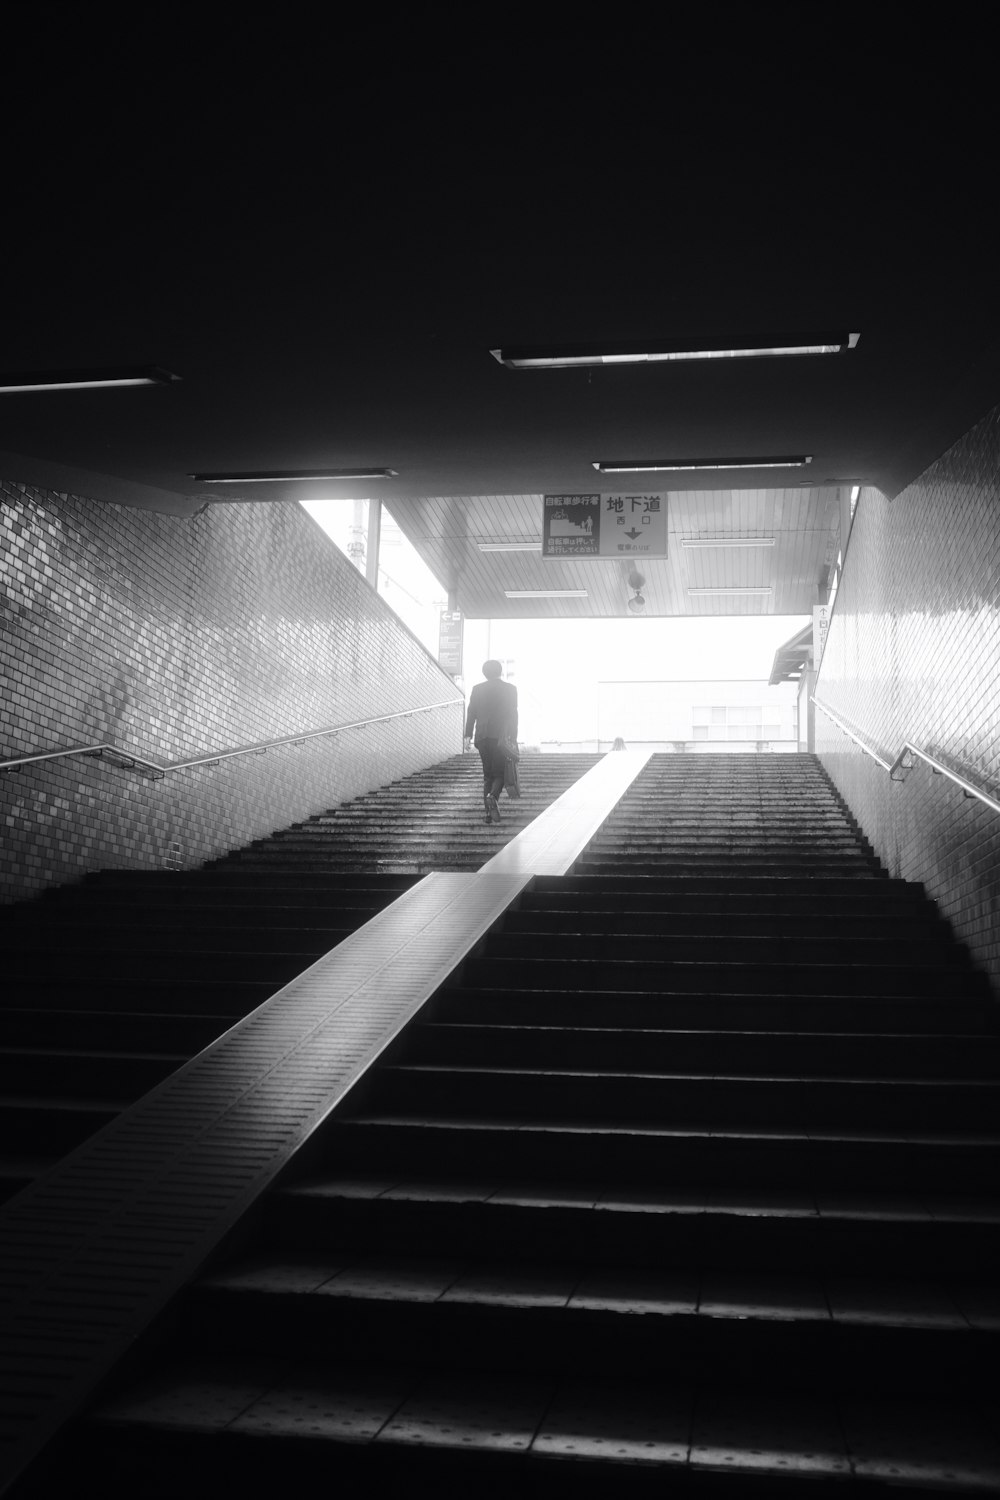 a man walking up a flight of stairs